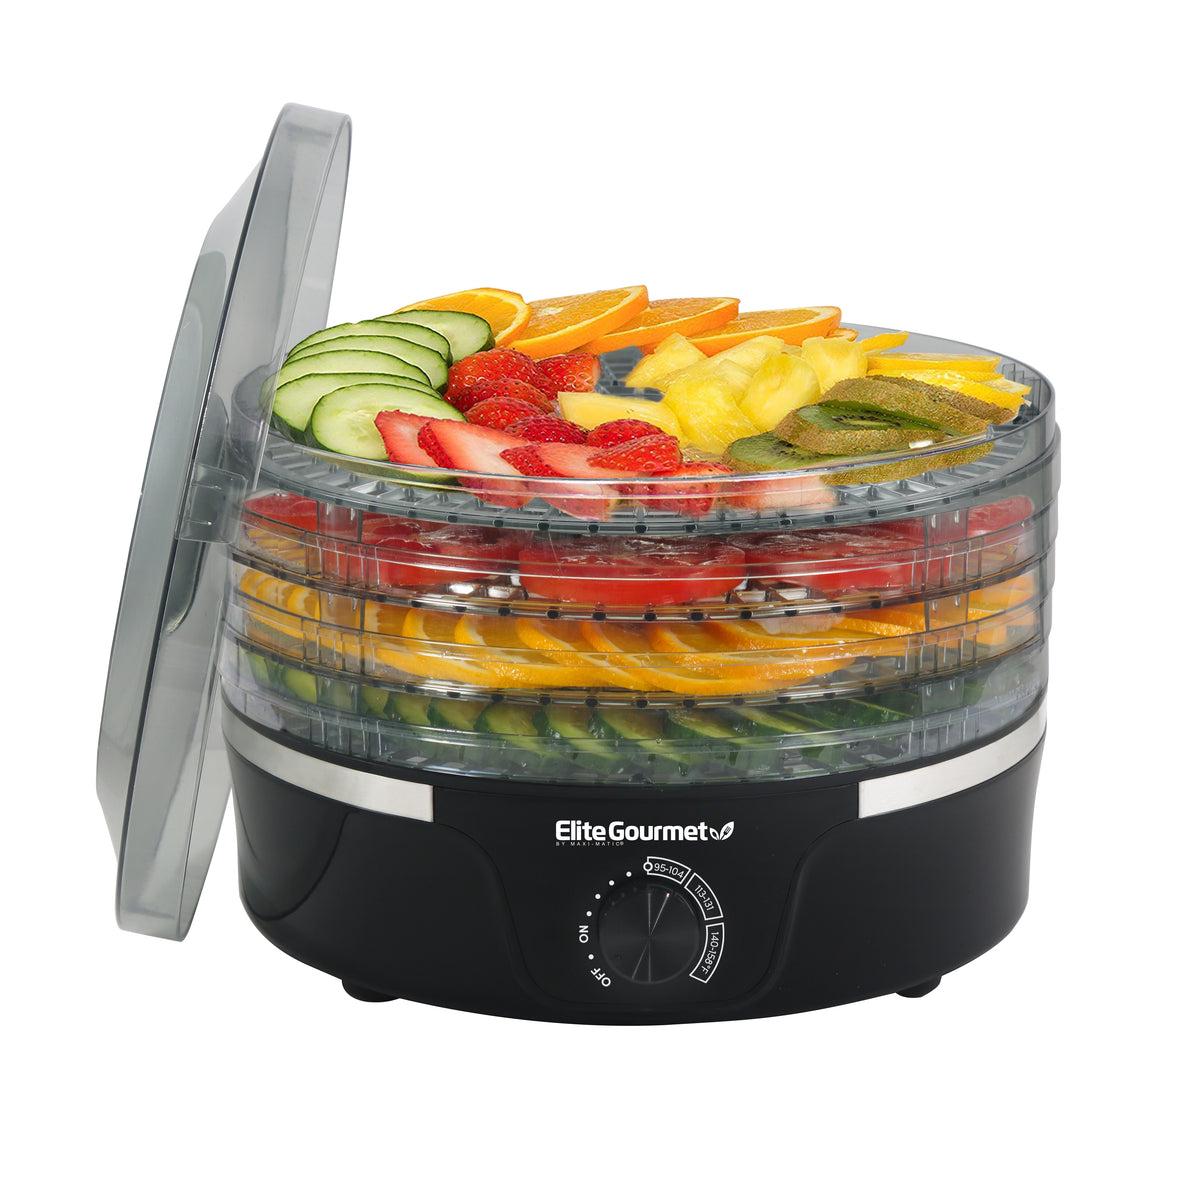 Elite Gourmet EFD770WD Digital Food Dehydrator with 5x12.5” BPA Free Trays,  Adjustable Time and Temperature Controls, Jerky, Herbs, Fruit, Veggies